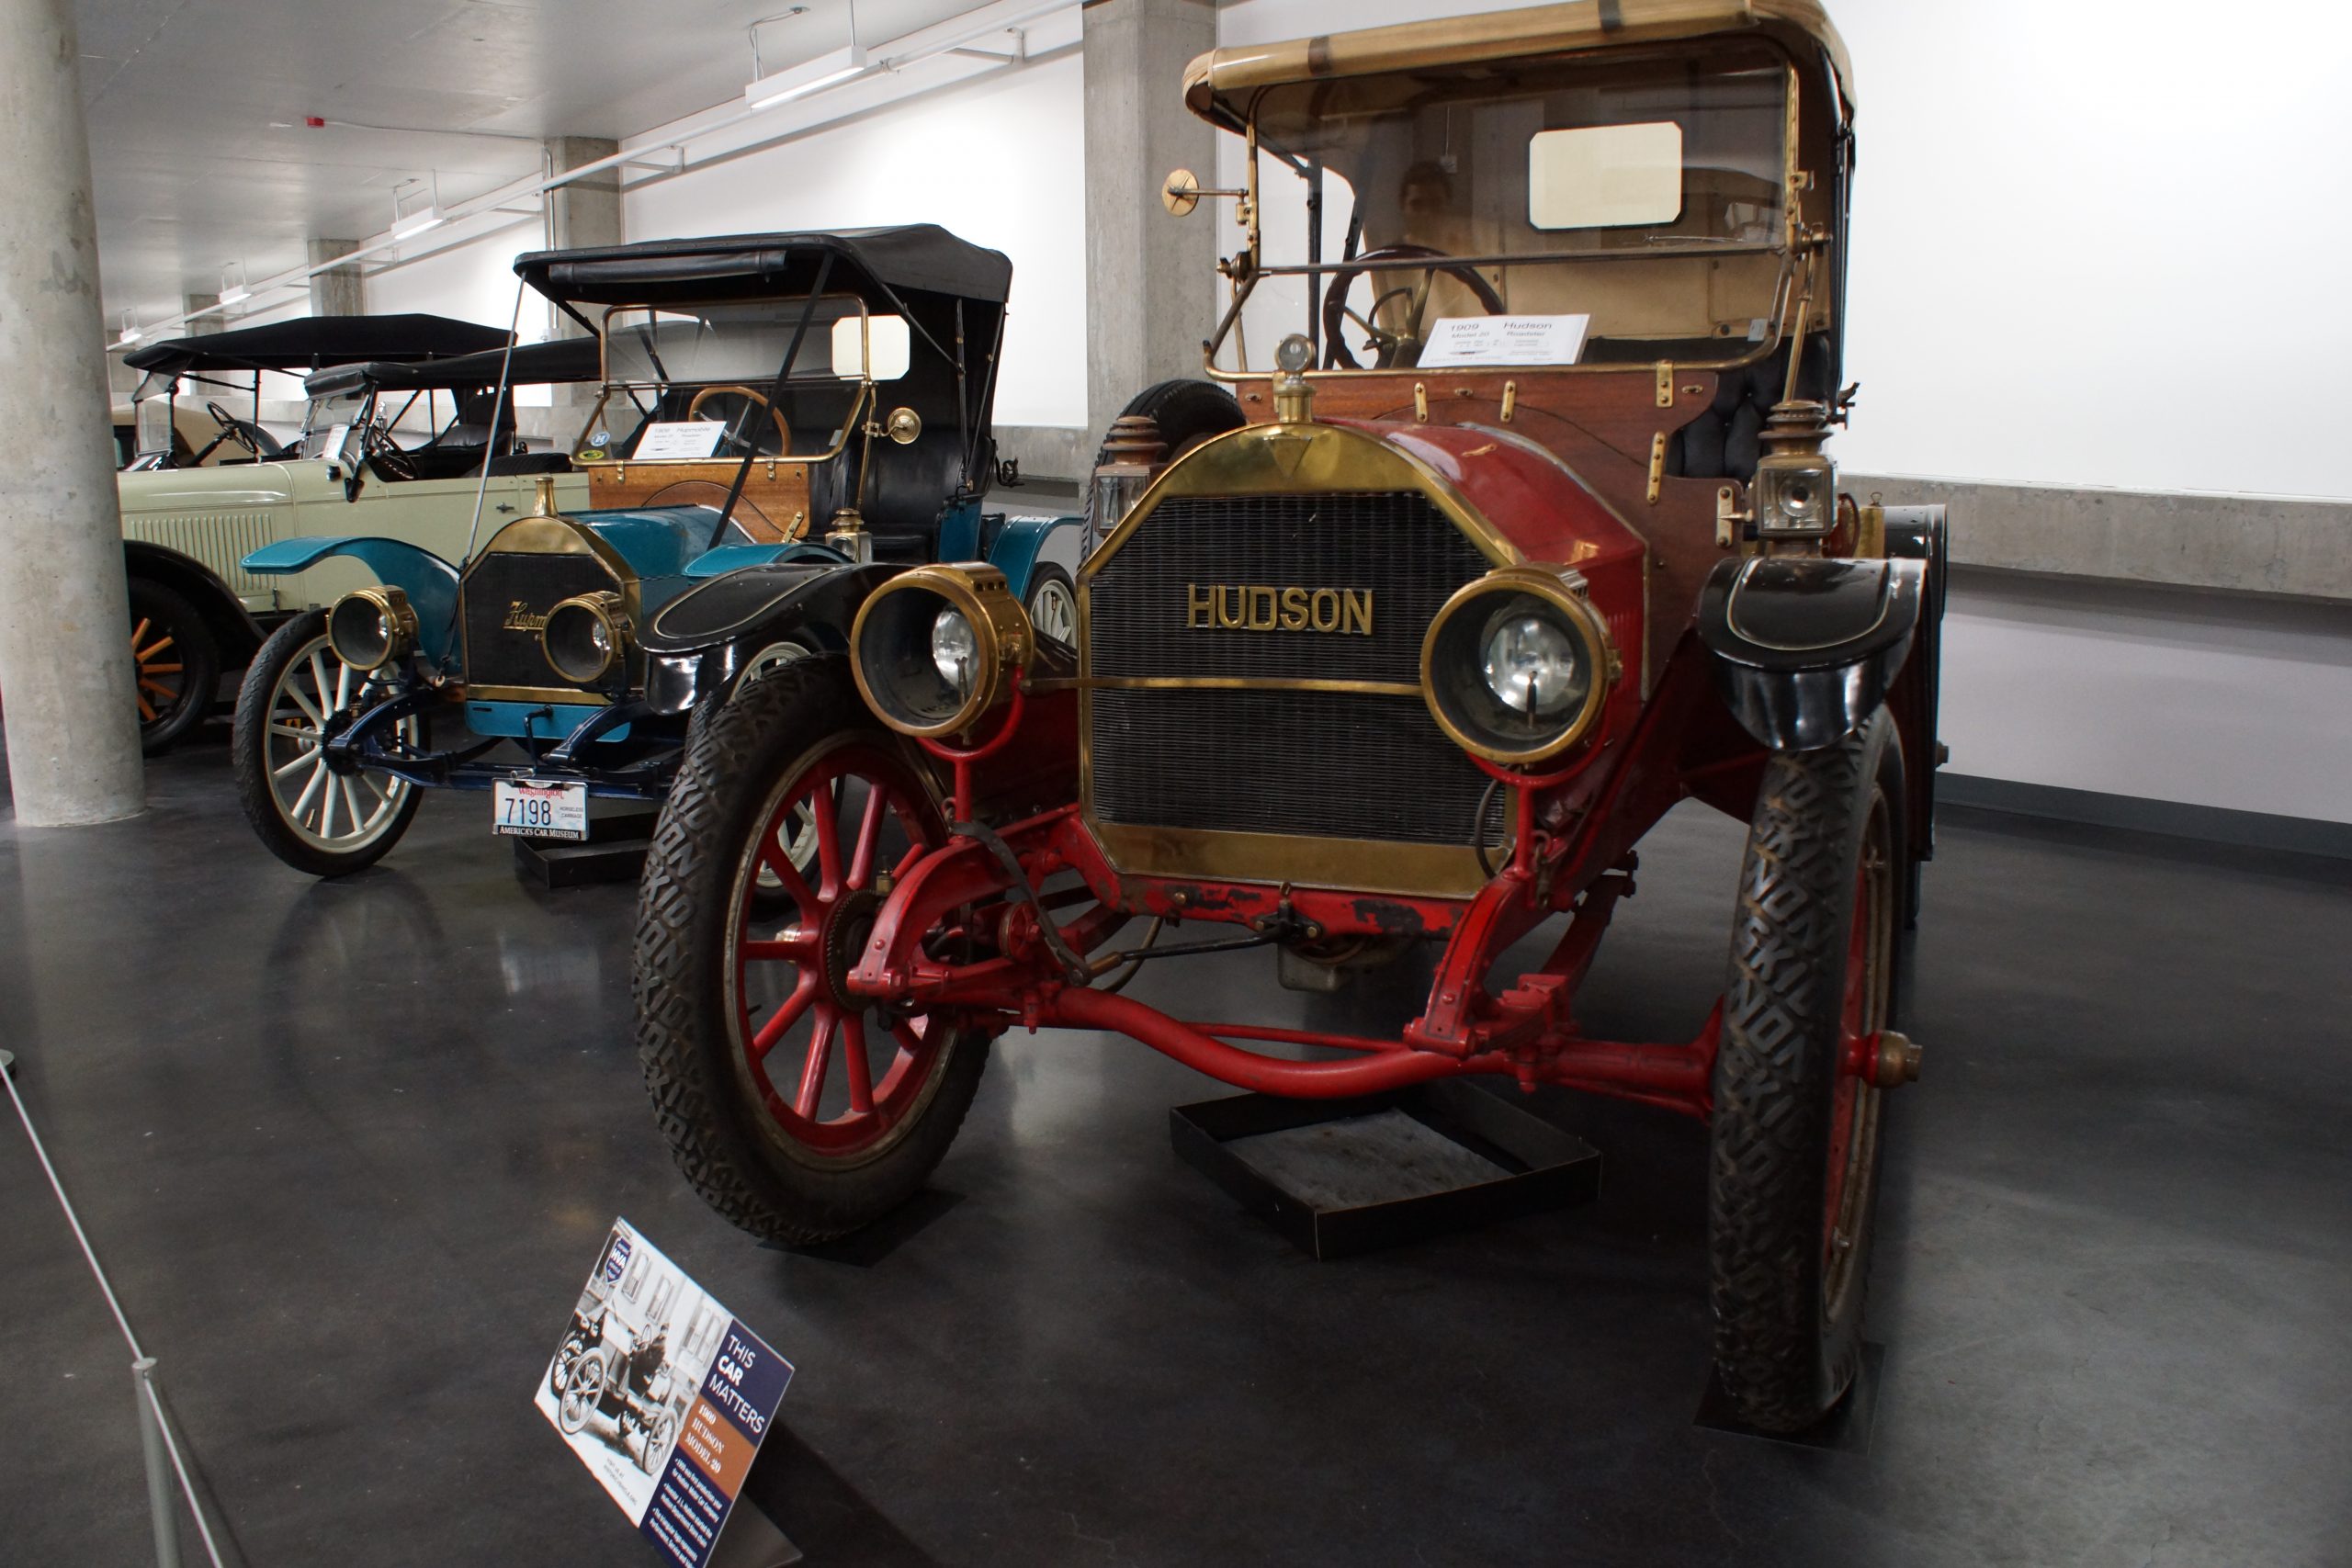 February 20, 1909 – Hudson is founded